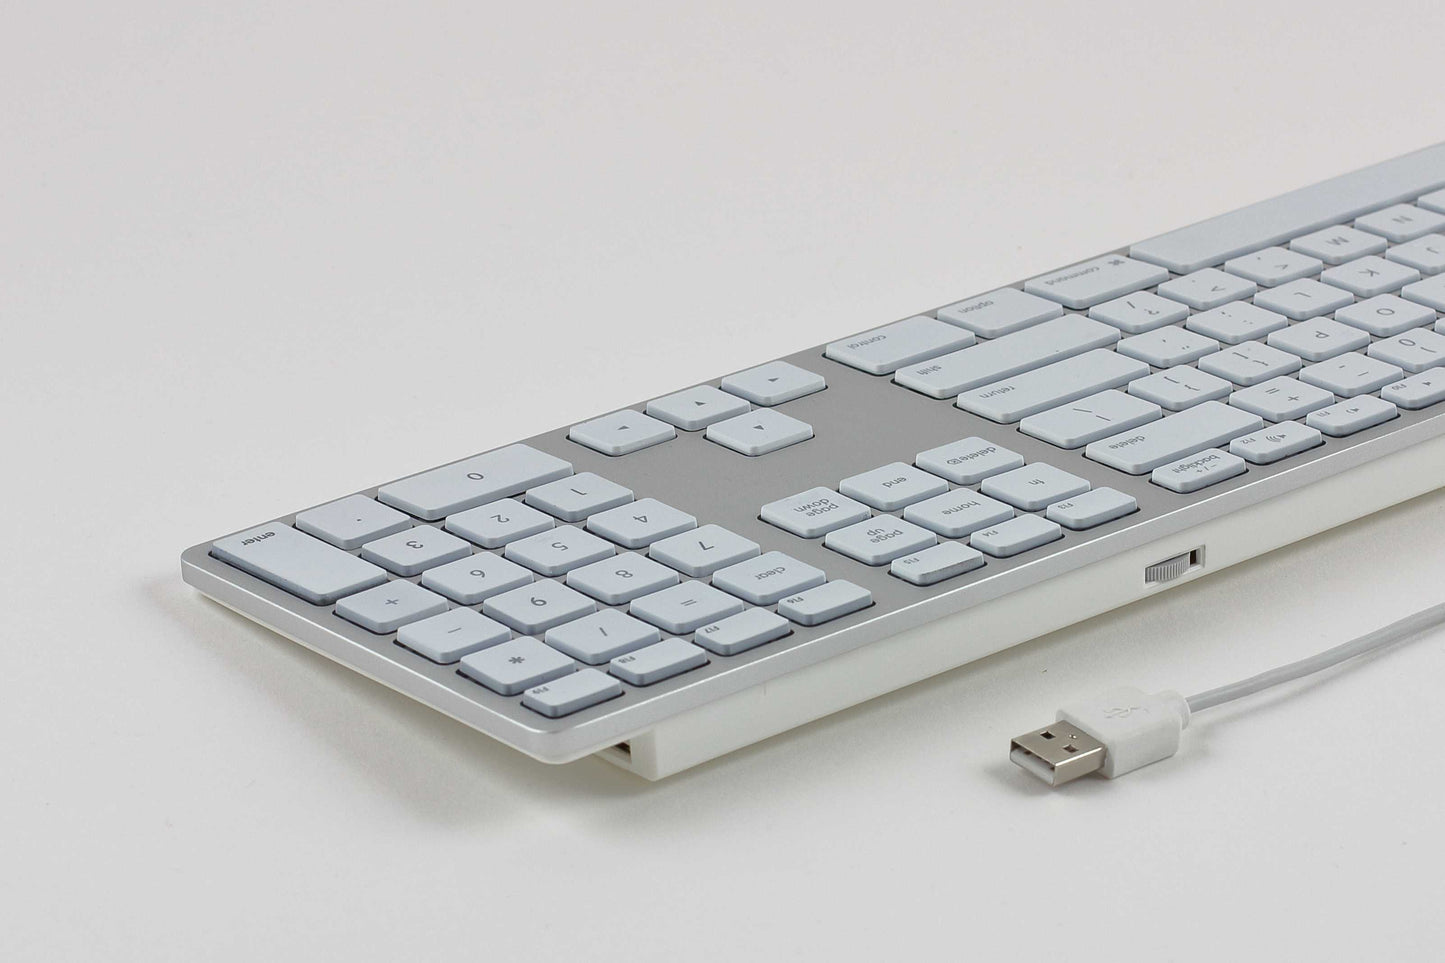 RGB Backlit Wired Aluminum Keyboard for Mac - Silver